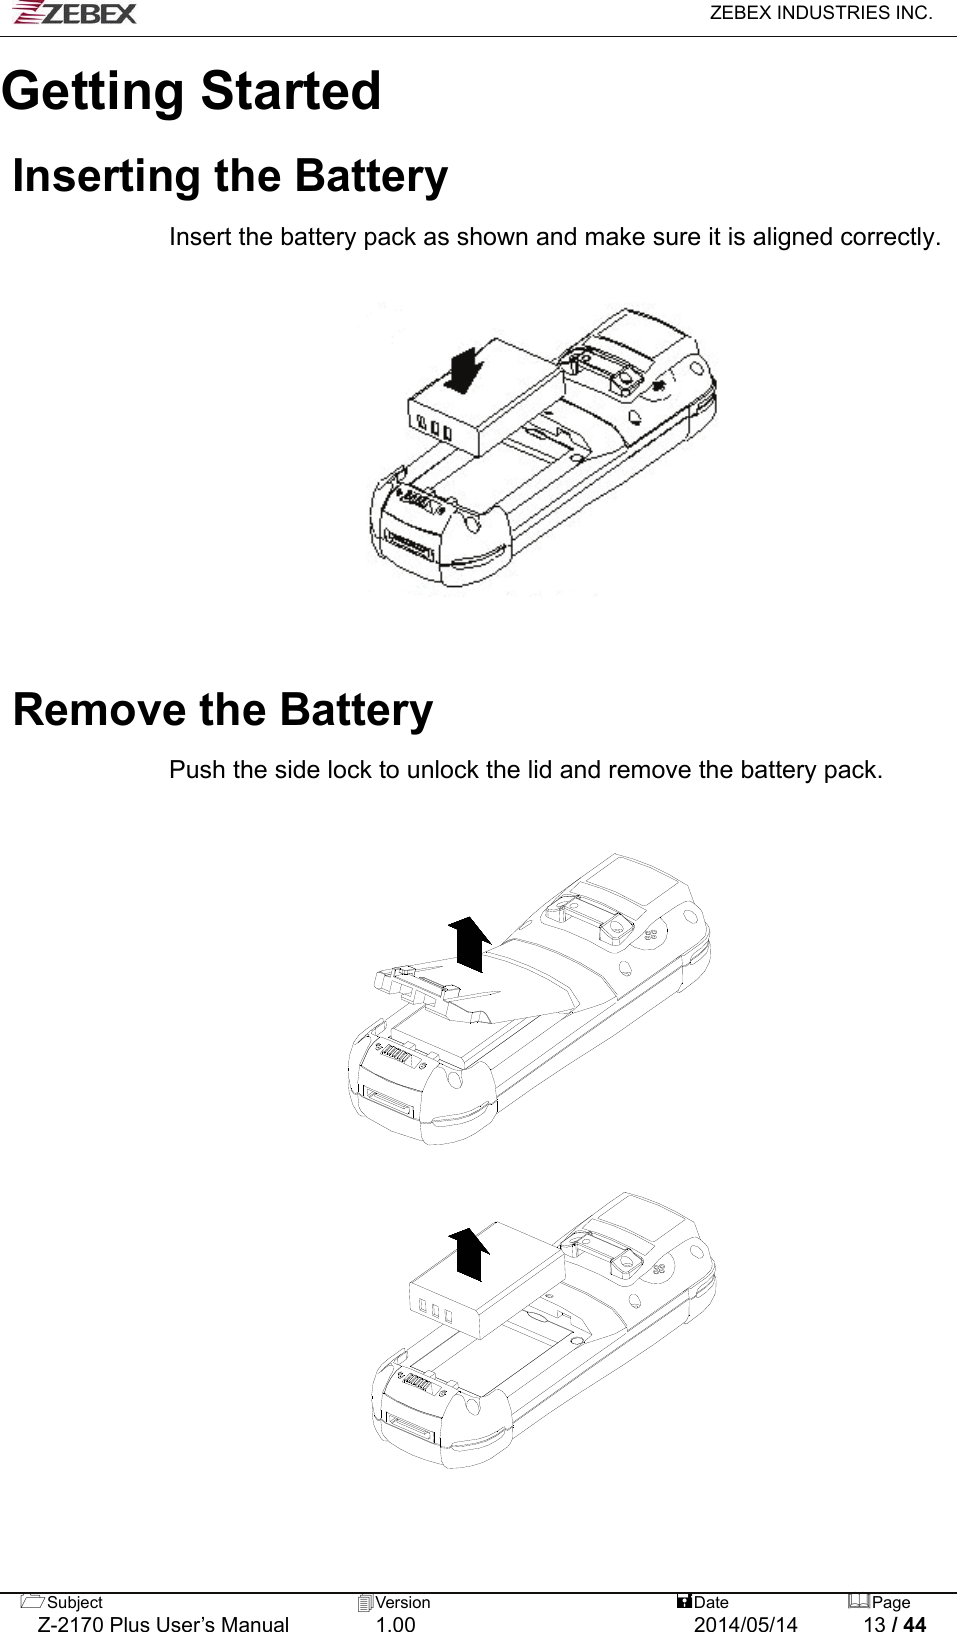   ZEBEX INDUSTRIES INC.  Subject  Version   DatePage   Z-2170 Plus User’s Manual  1.00  2014/05/14  13 / 44 Getting Started  Inserting the Battery  Insert the battery pack as shown and make sure it is aligned correctly.                Remove the Battery  Push the side lock to unlock the lid and remove the battery pack.                                                      